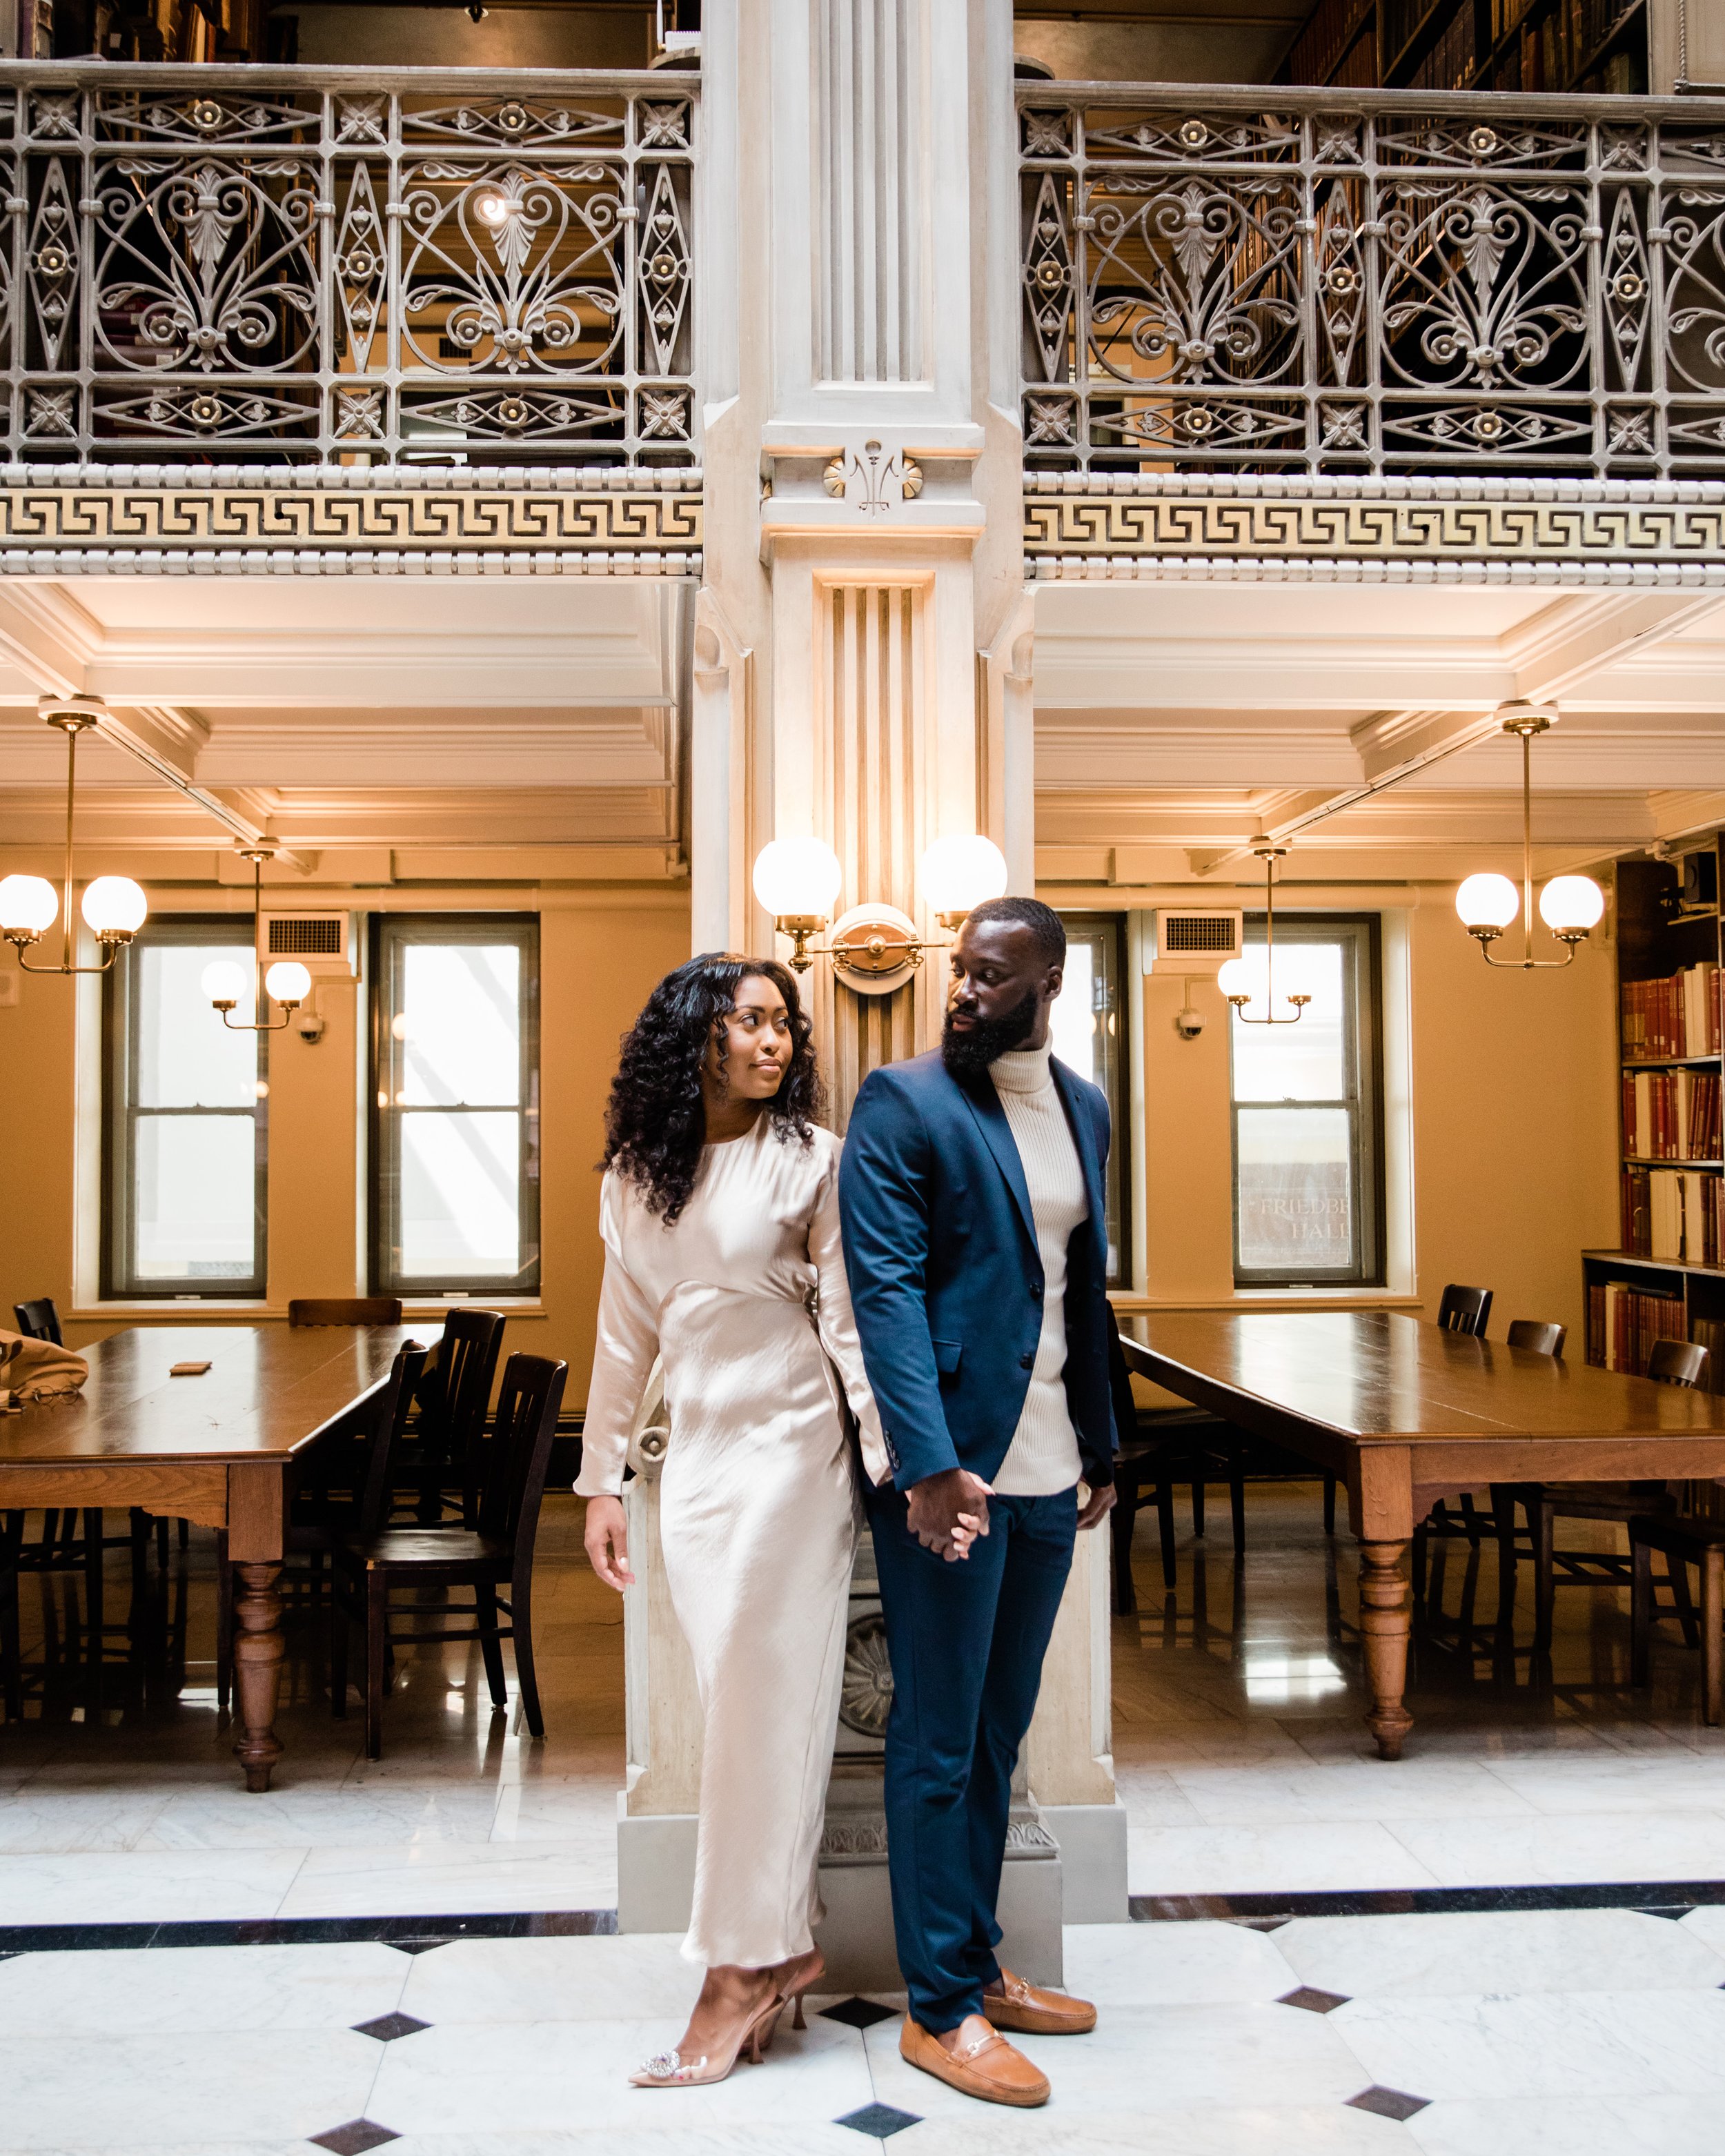 Disney Beauty and The Beast Inspired Engagement Session at The Peabody Library Baltimore Maryland shot by Megapixels Media Photography-28.jpg